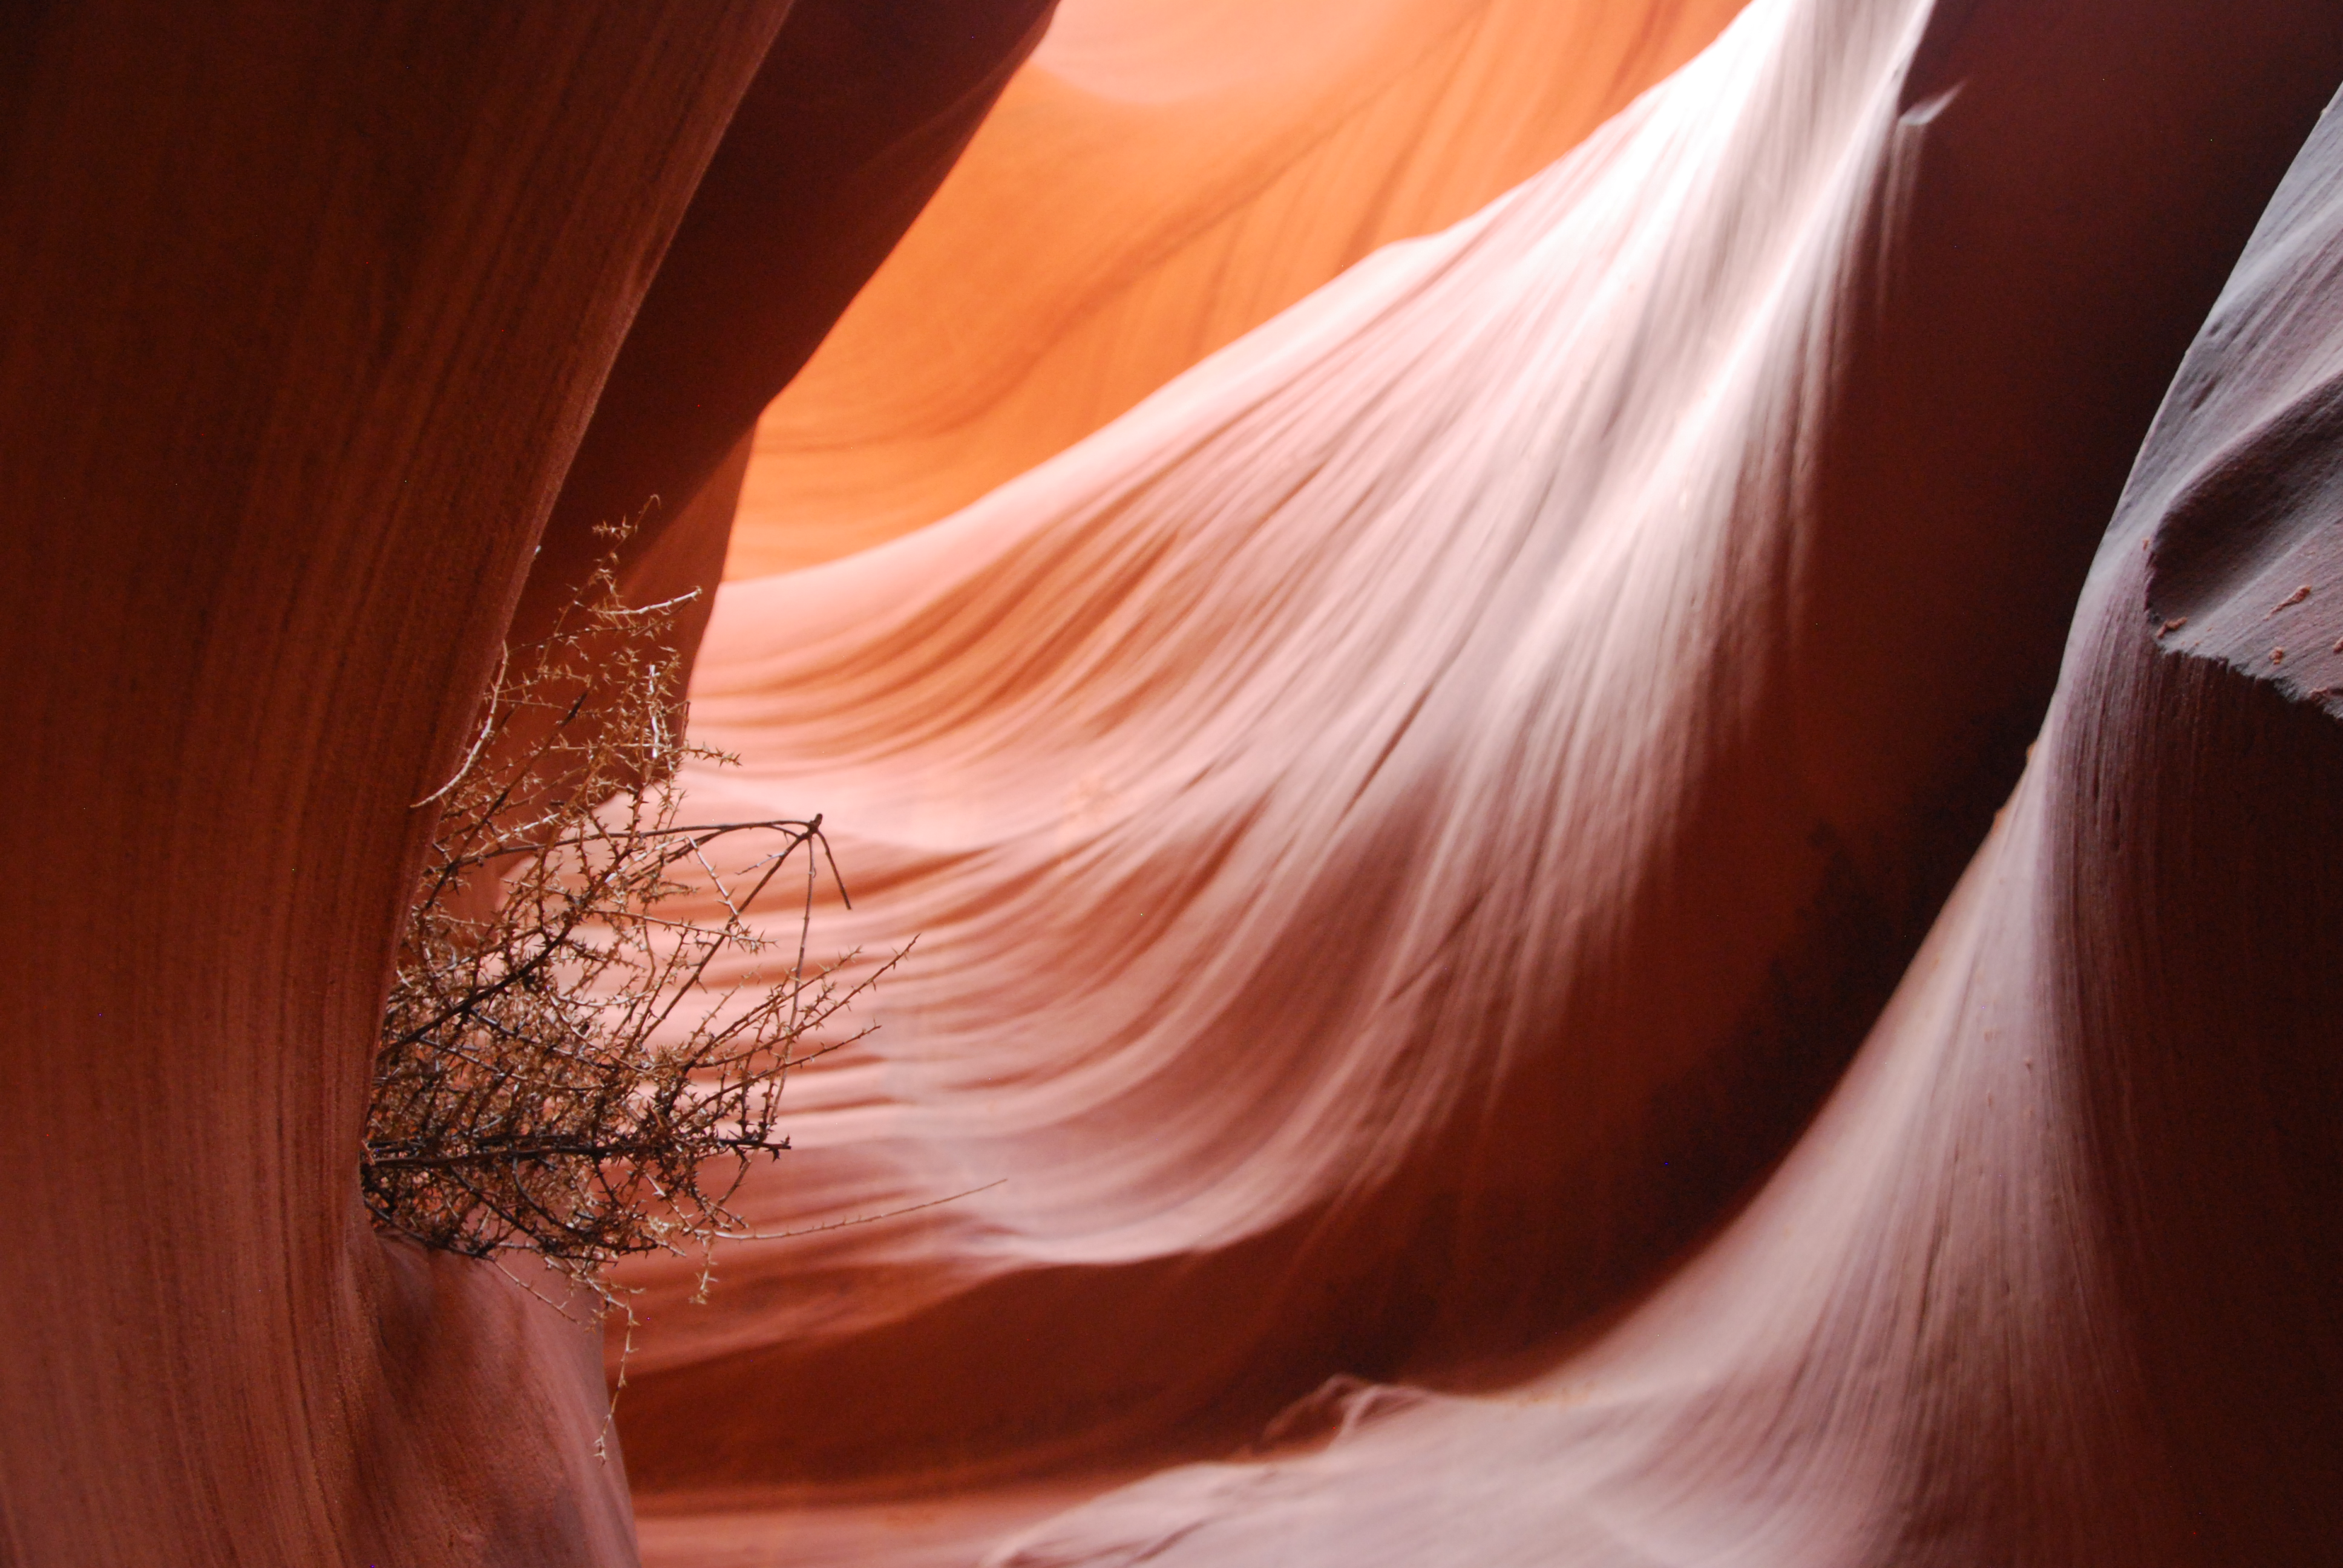 Lower Antelope Canyon, photographed by Shelley Adina